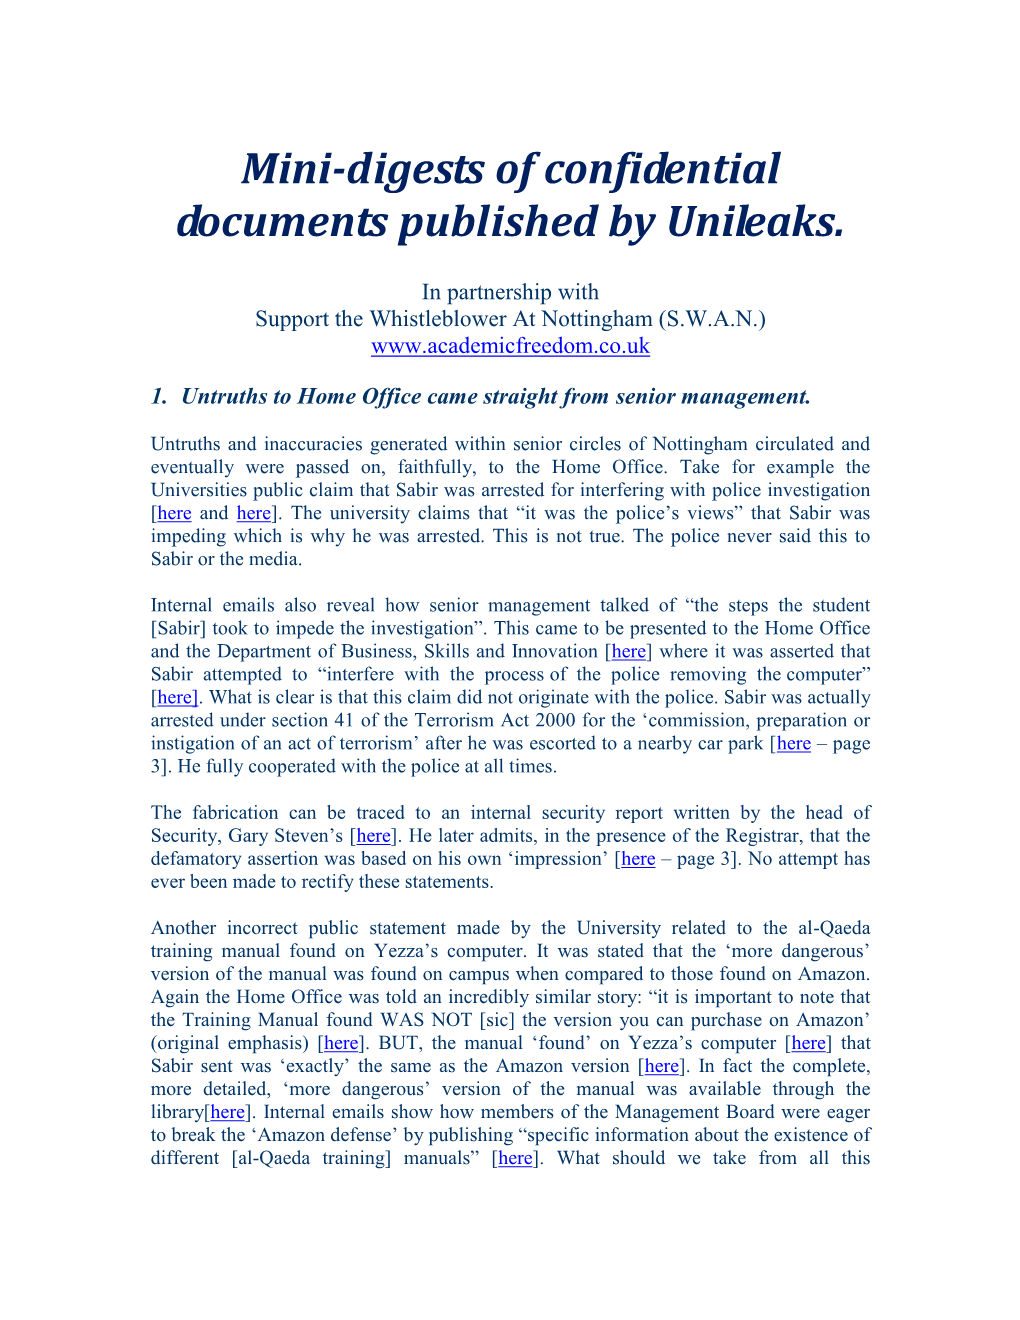 Mini-Digests of Confidential Documents Published by Unileaks